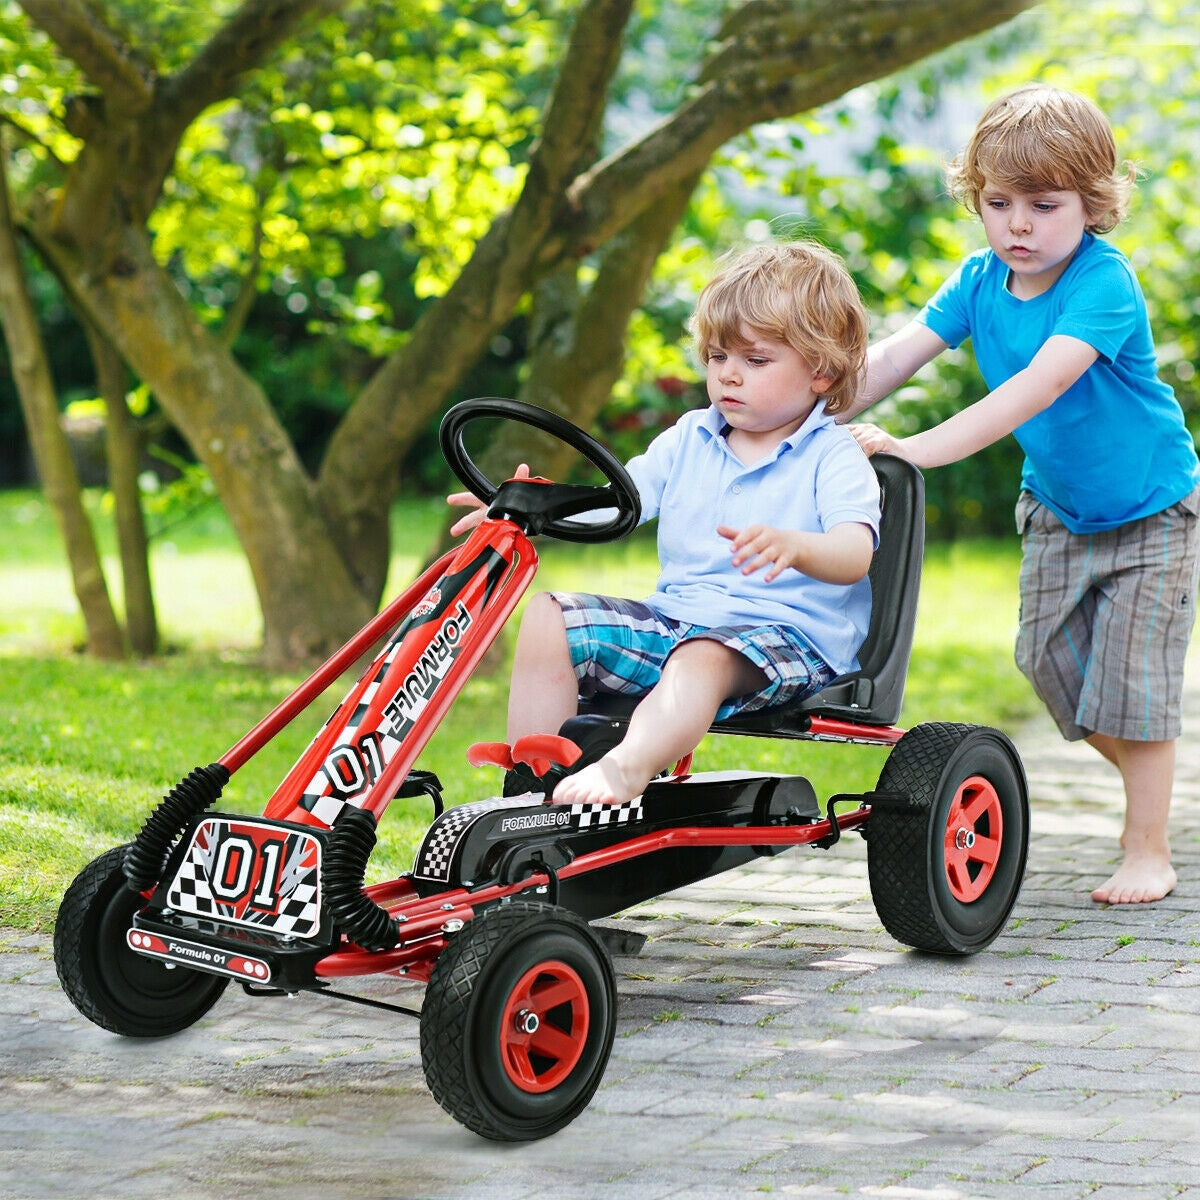 4 Wheels Kids Ride On Pedal Powered Bike Go Kart Racer Car Outdoor Play Toy-Red - Color: Red